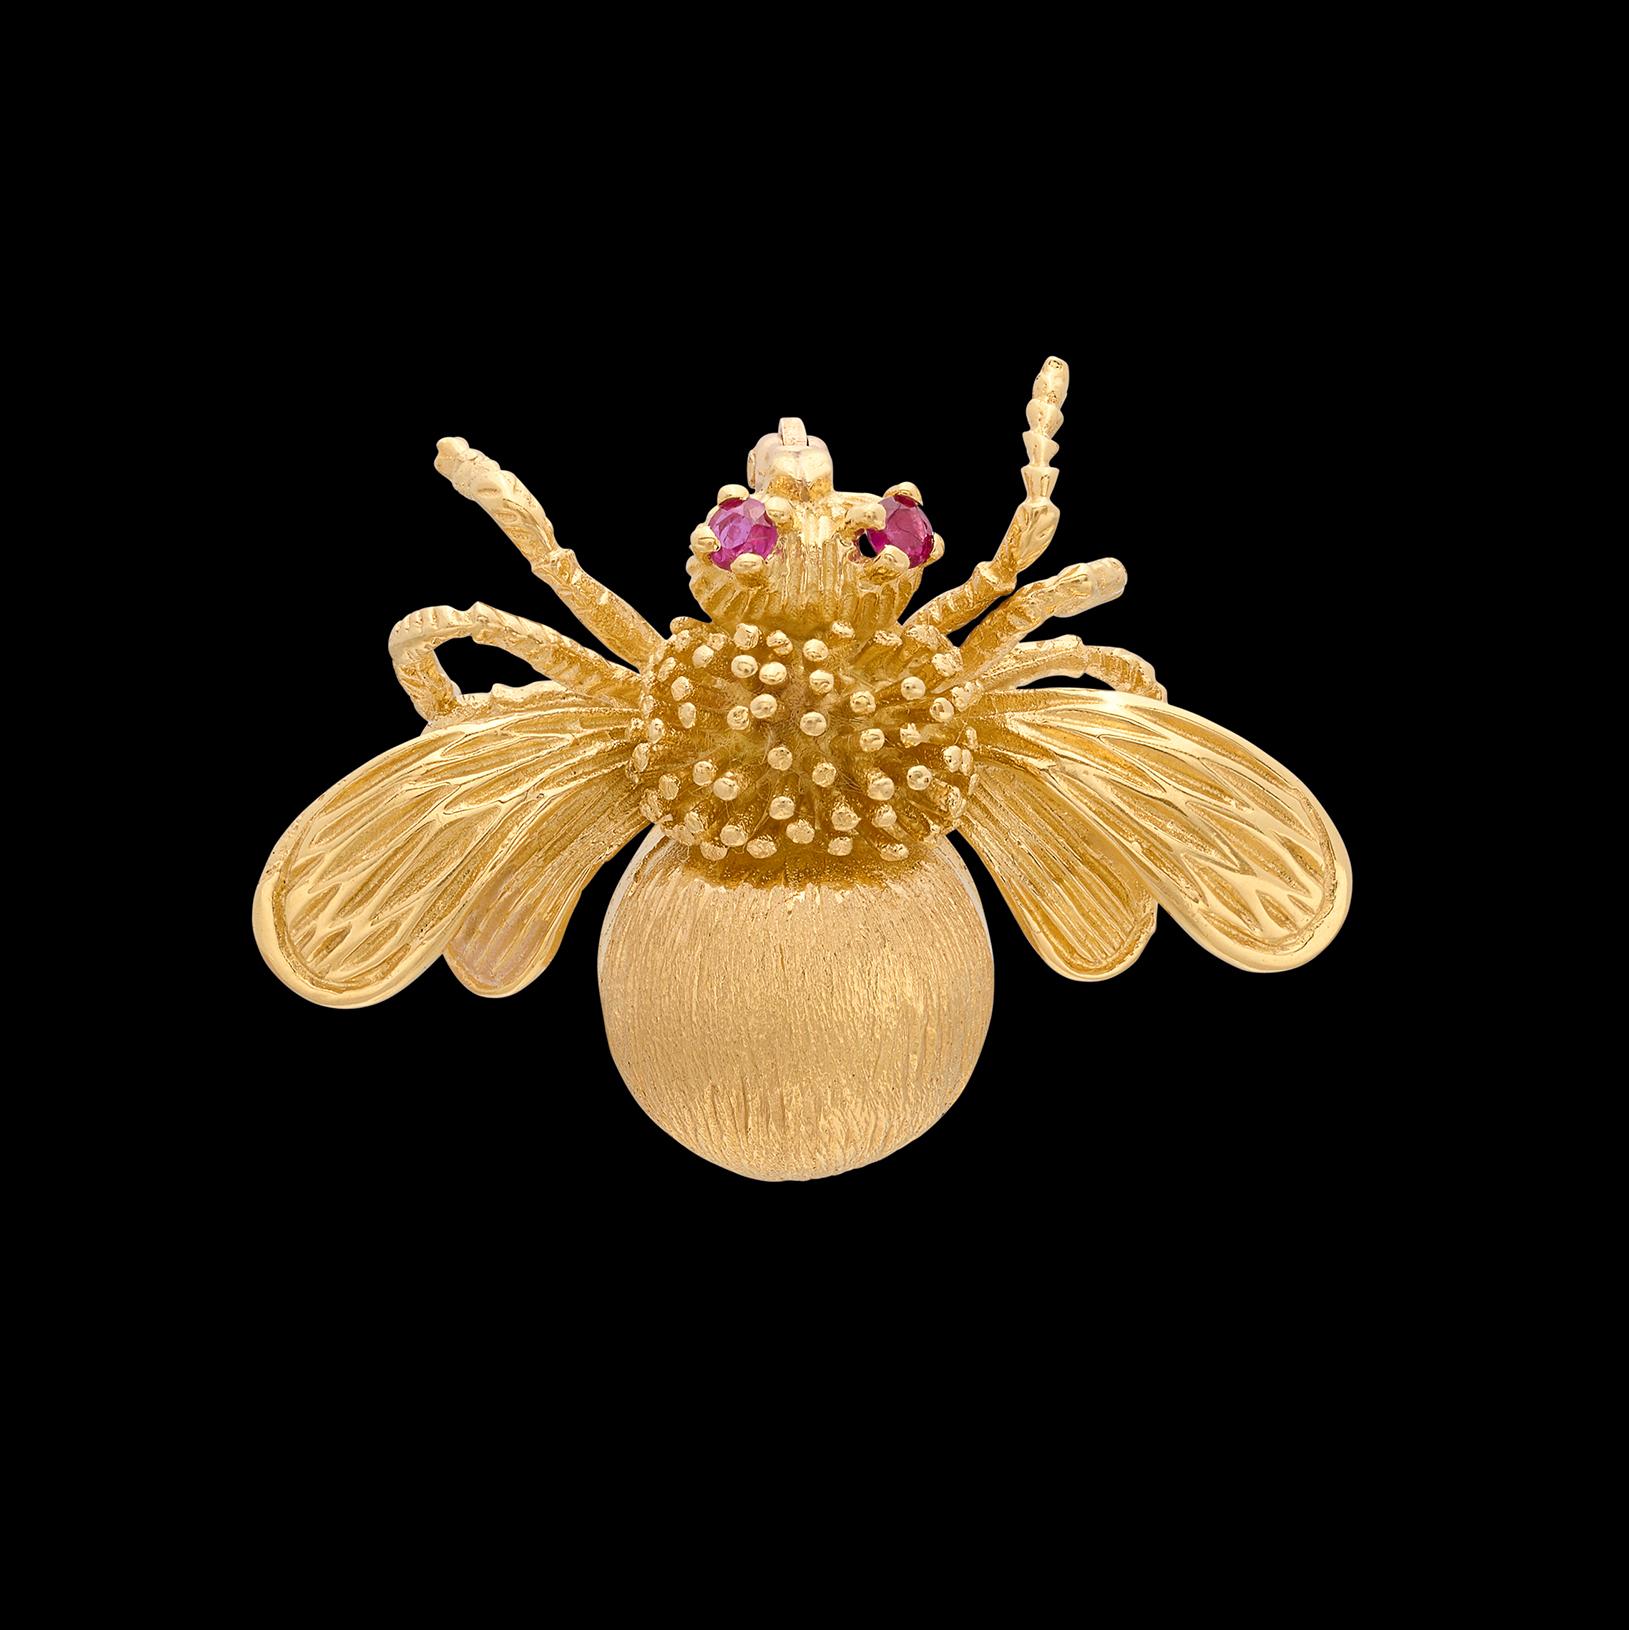 For the entomophile in your life! This gold bug brooch by the one and only Tiffany & Co. circa 1970's features impeccable design and craftsmanship, highlighted by two ruby eyes delivering the perfect pop of color. The piece weighs 12 grams and